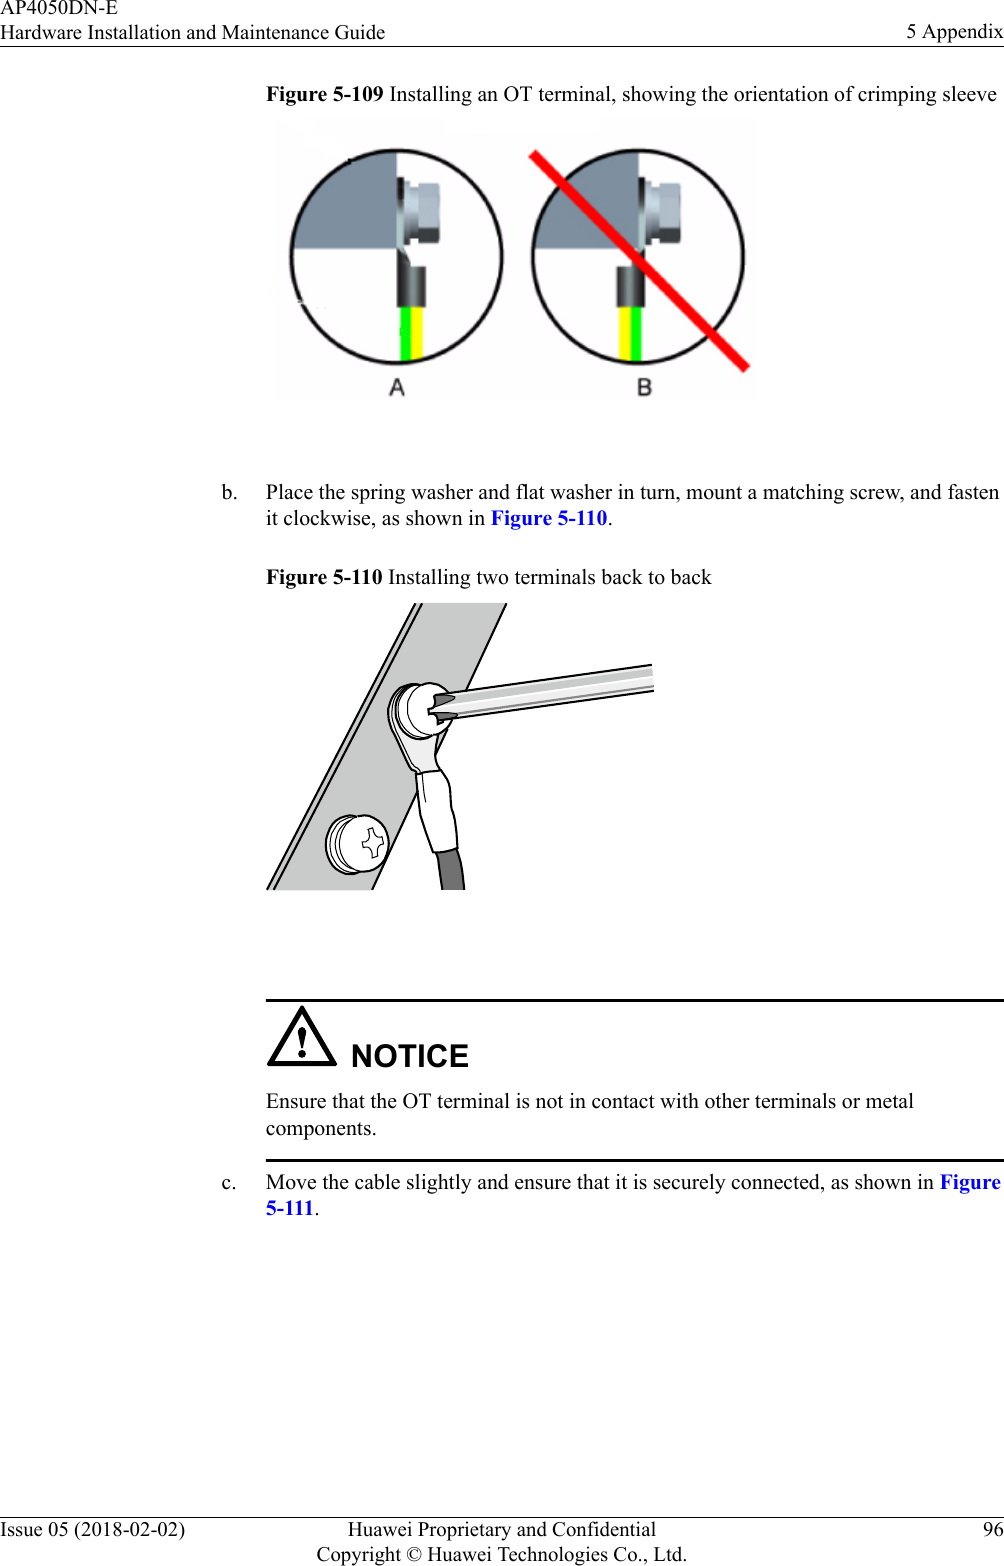 Figure 5-109 Installing an OT terminal, showing the orientation of crimping sleeve b. Place the spring washer and flat washer in turn, mount a matching screw, and fastenit clockwise, as shown in Figure 5-110.Figure 5-110 Installing two terminals back to back NOTICEEnsure that the OT terminal is not in contact with other terminals or metalcomponents.c. Move the cable slightly and ensure that it is securely connected, as shown in Figure5-111.AP4050DN-EHardware Installation and Maintenance Guide 5 AppendixIssue 05 (2018-02-02) Huawei Proprietary and ConfidentialCopyright © Huawei Technologies Co., Ltd.96